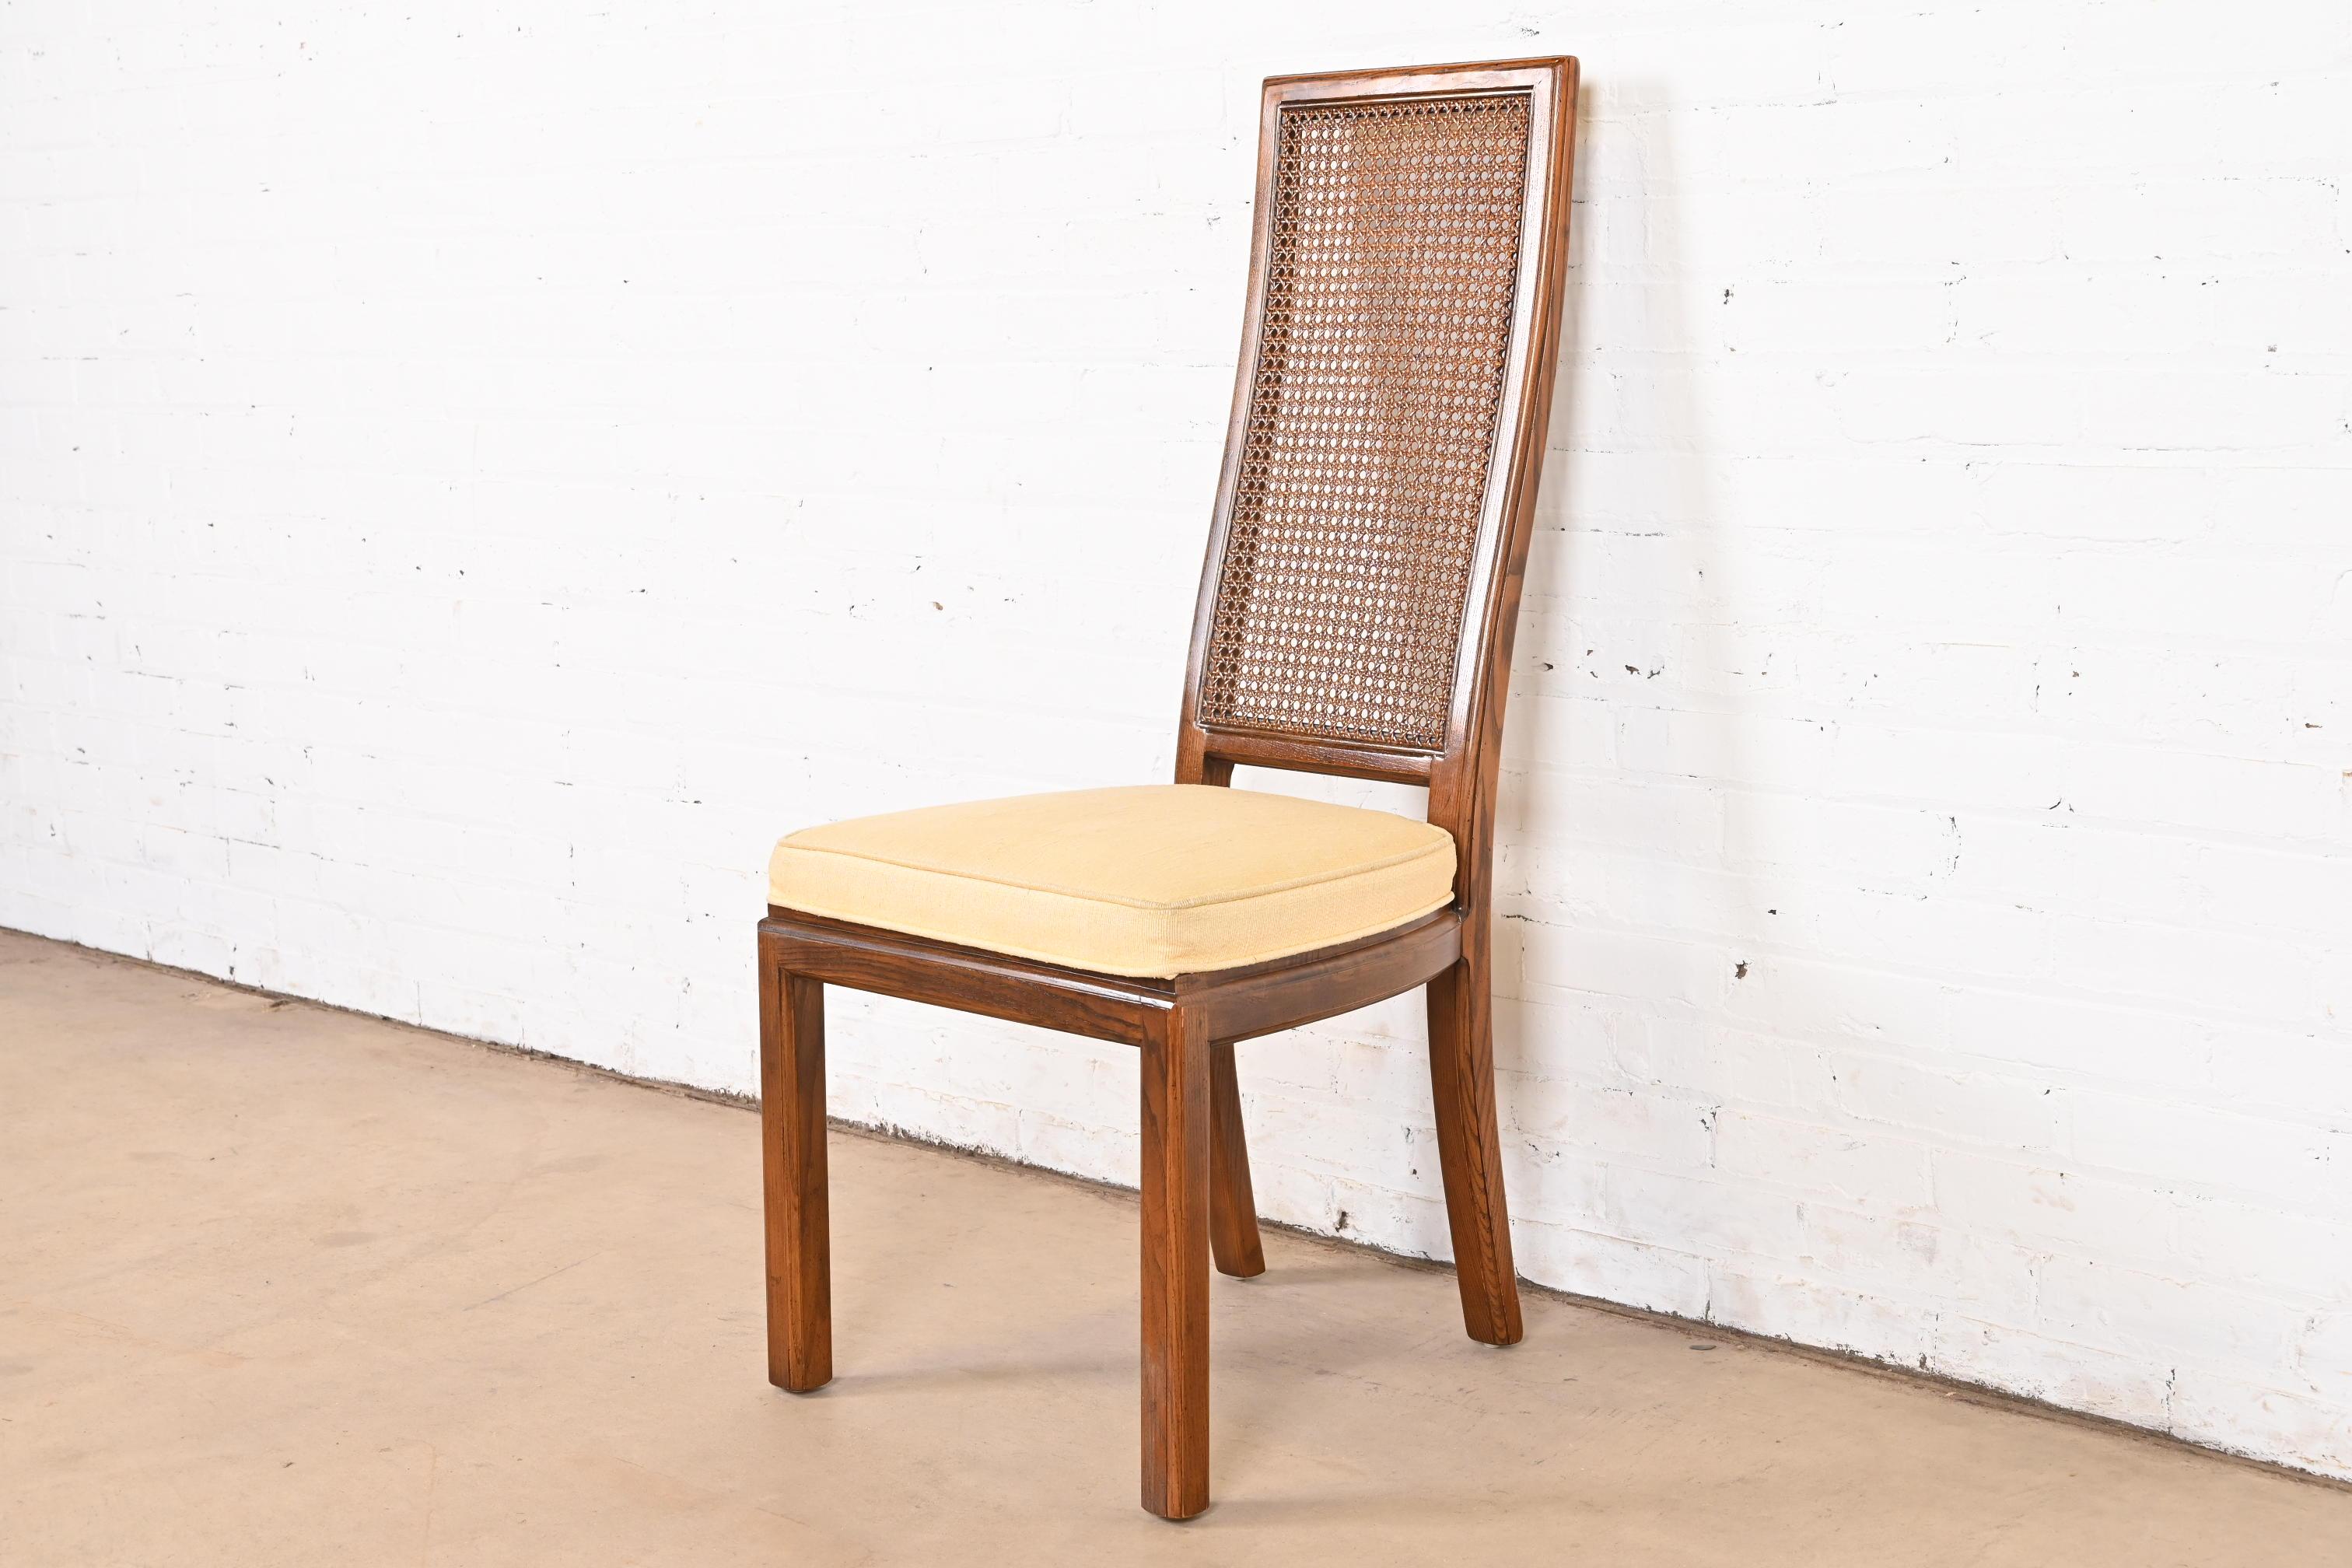 Late 20th Century Henredon Mid-Century Modern Oak and Cane High Back Side Chair, Circa 1970s For Sale